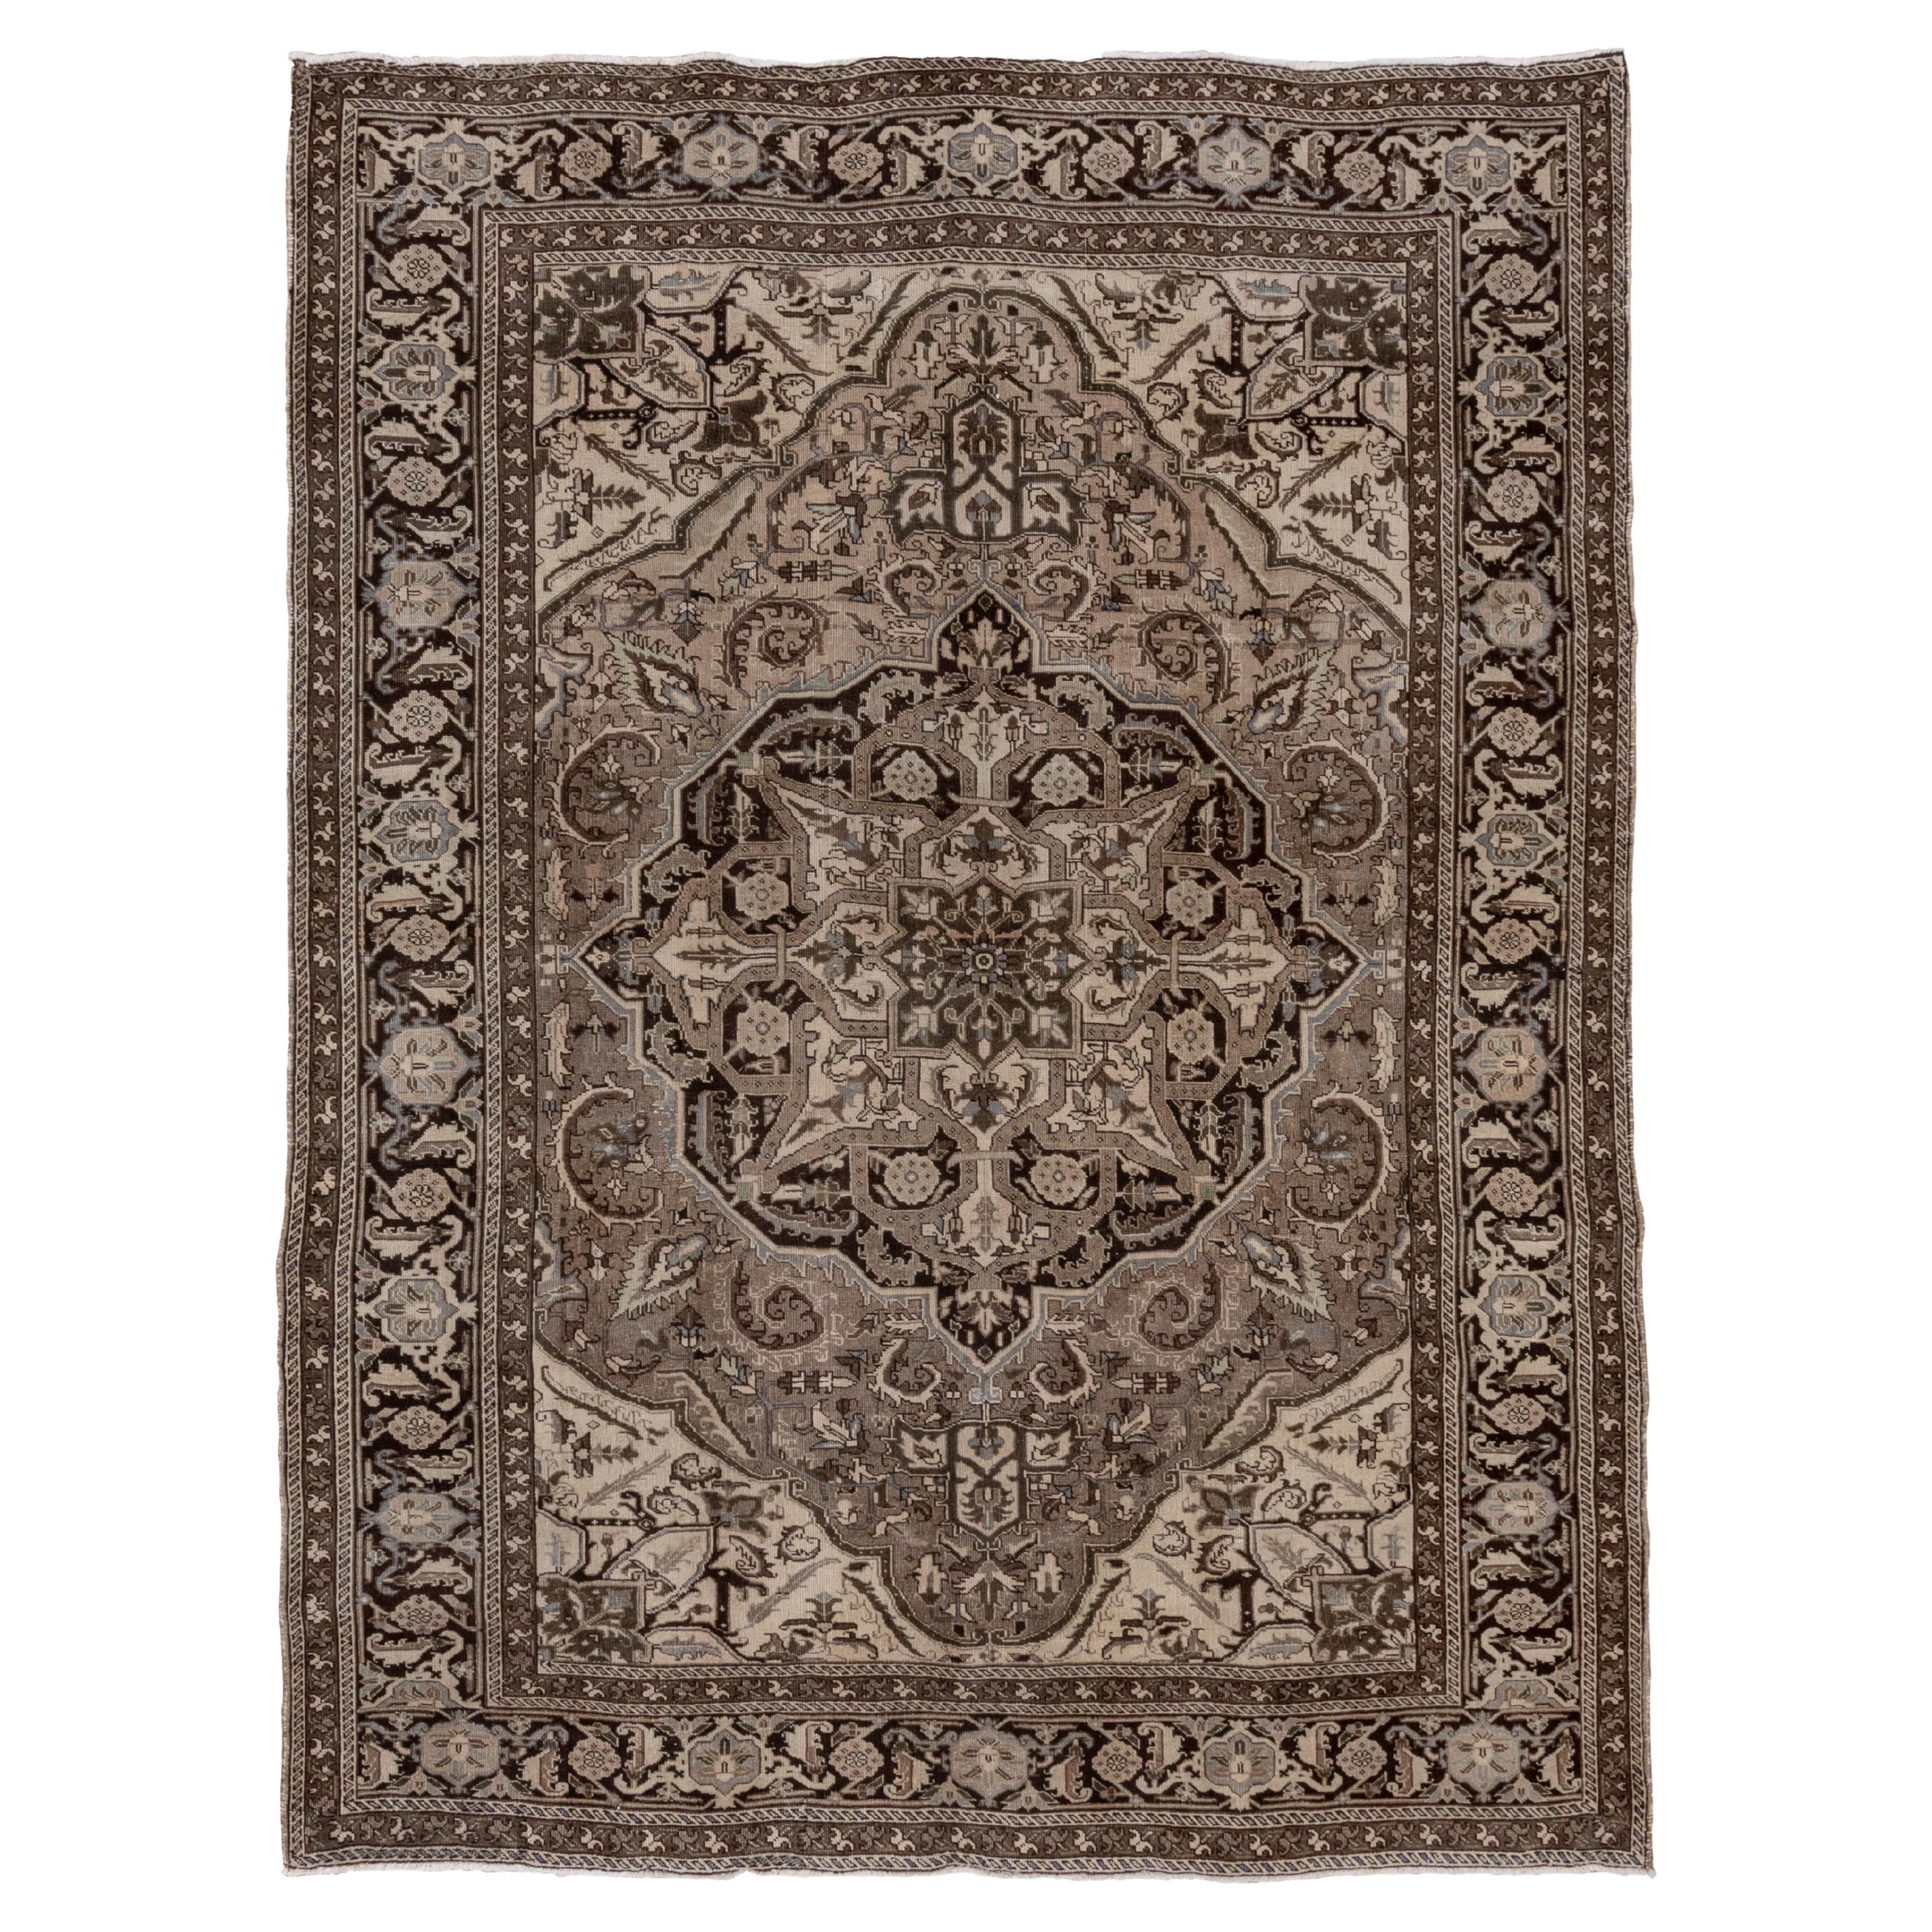 Antique Brown Heriz Rug with Gray Accents, Circa 1930s